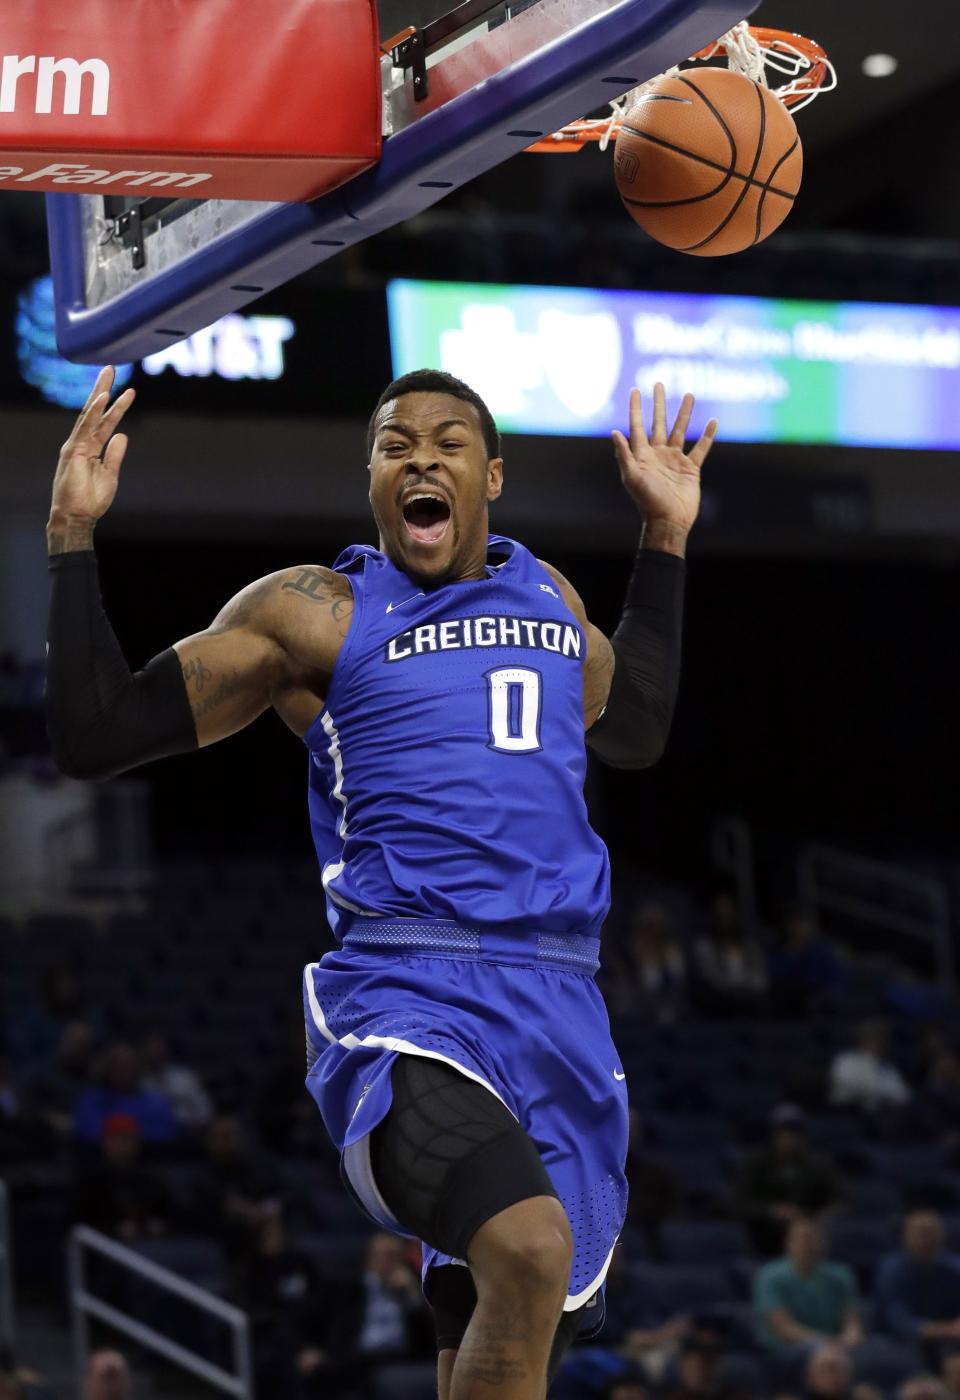 Creighton guard Marcus Foster reacts to a dunk against DePaul during the first half of an NCAA college basketball game Wednesday, Feb. 7, 2018, in Chicago. Foster scored 29 points to reach 2,000 for his college career.